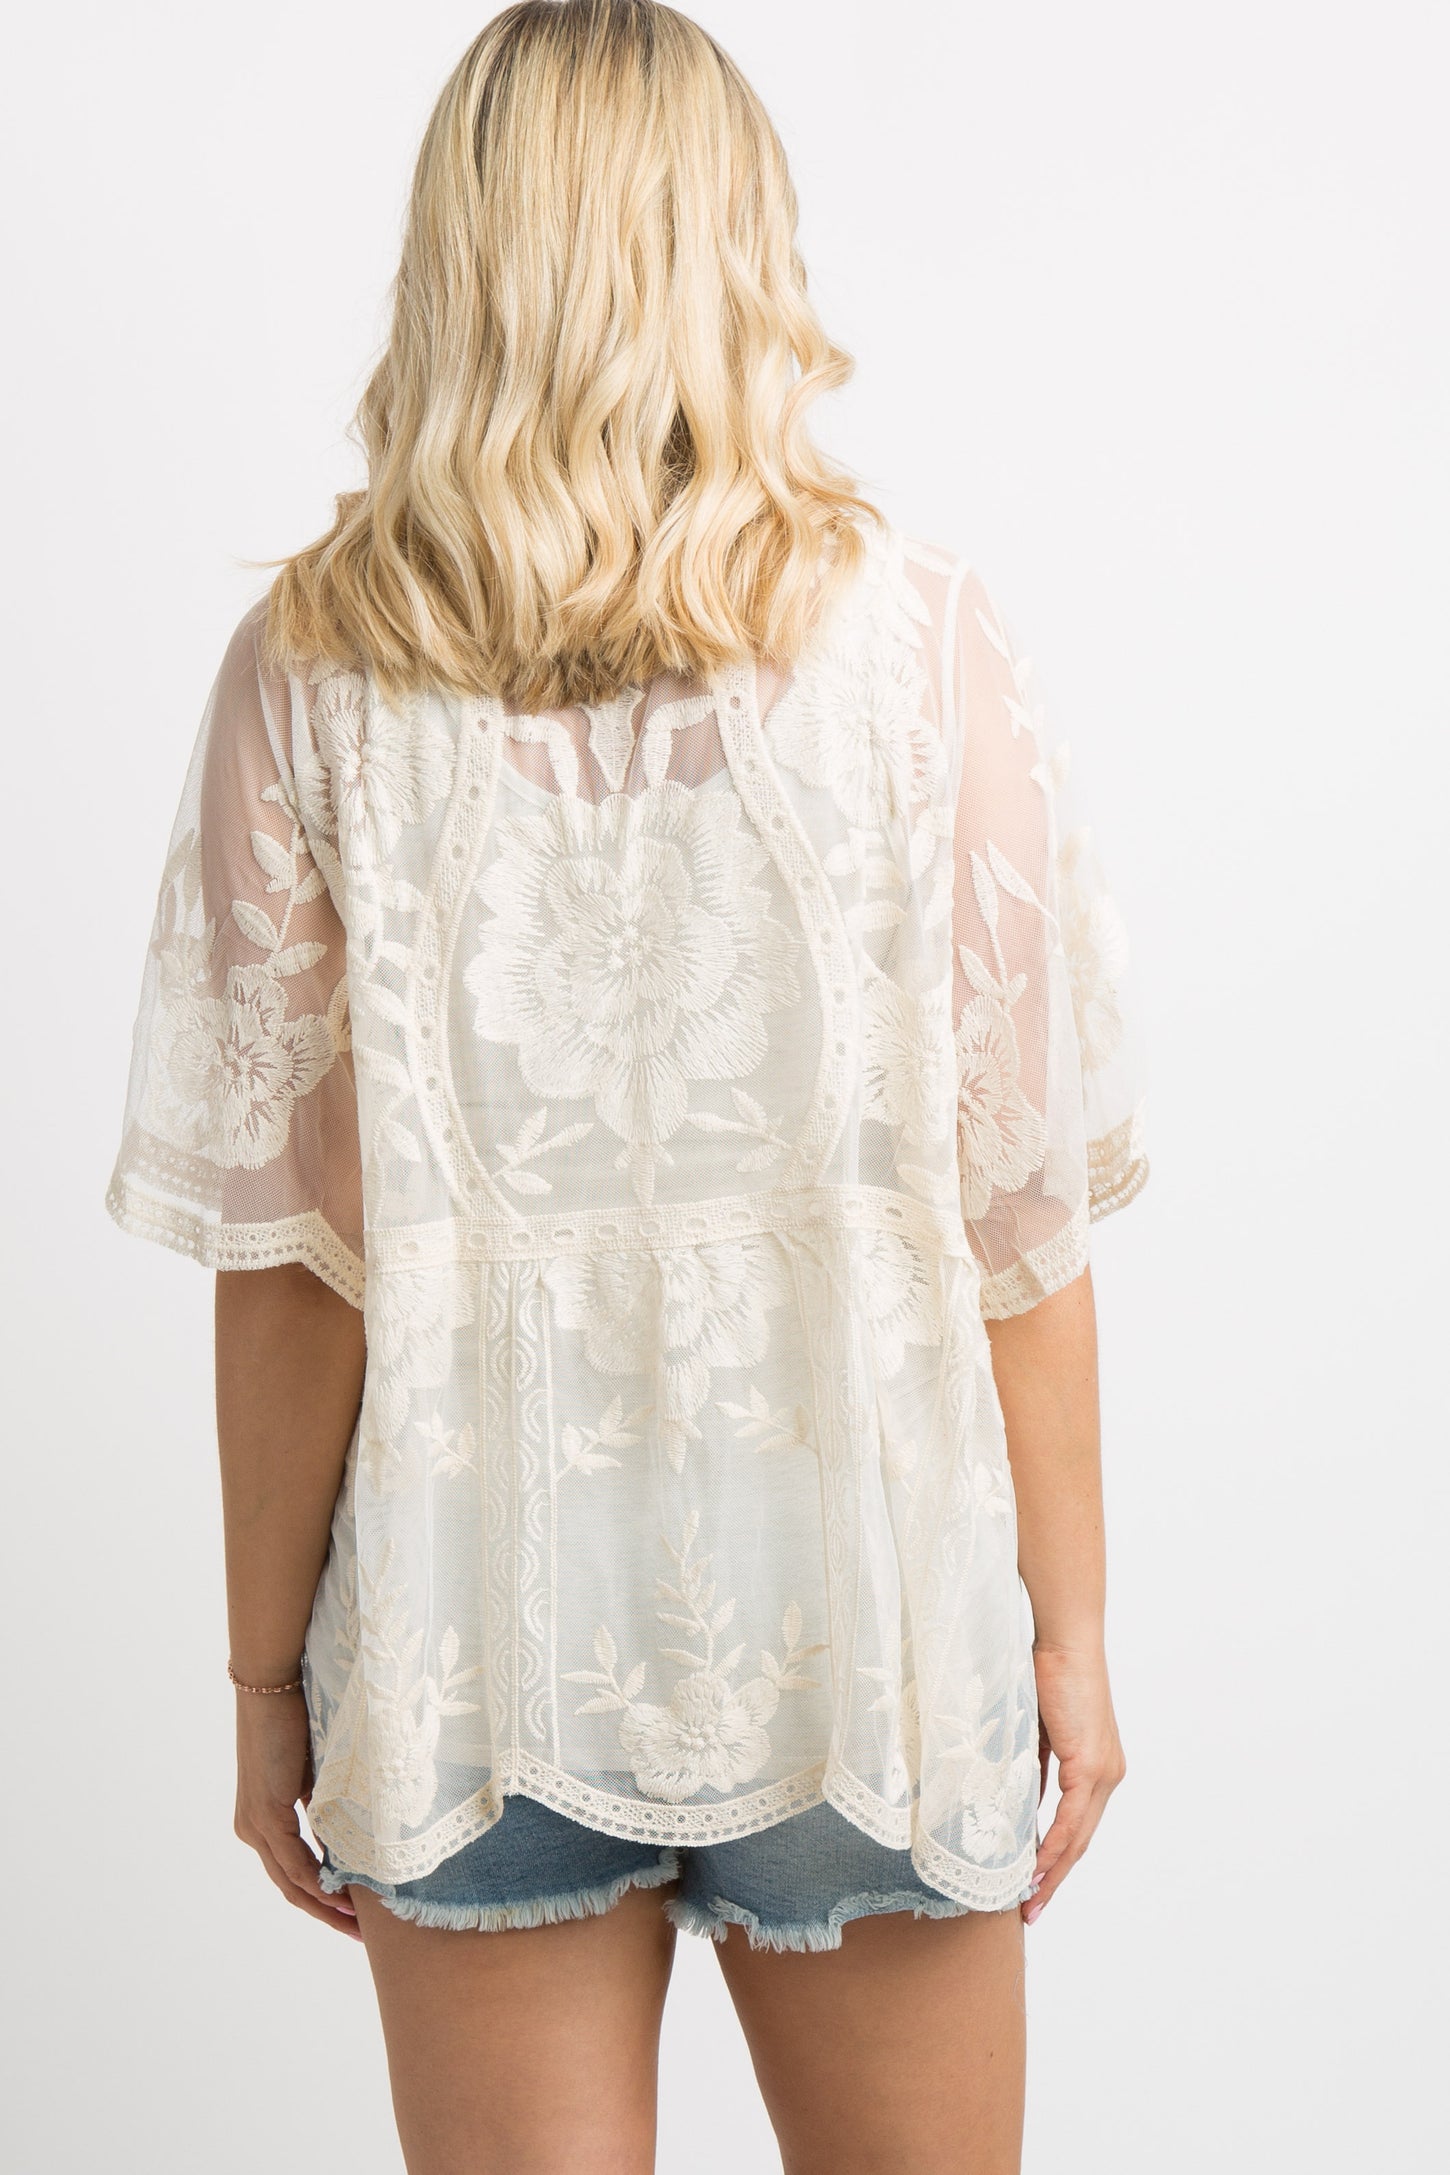 Ivory Scalloped Lace Mesh Maternity Cover Up